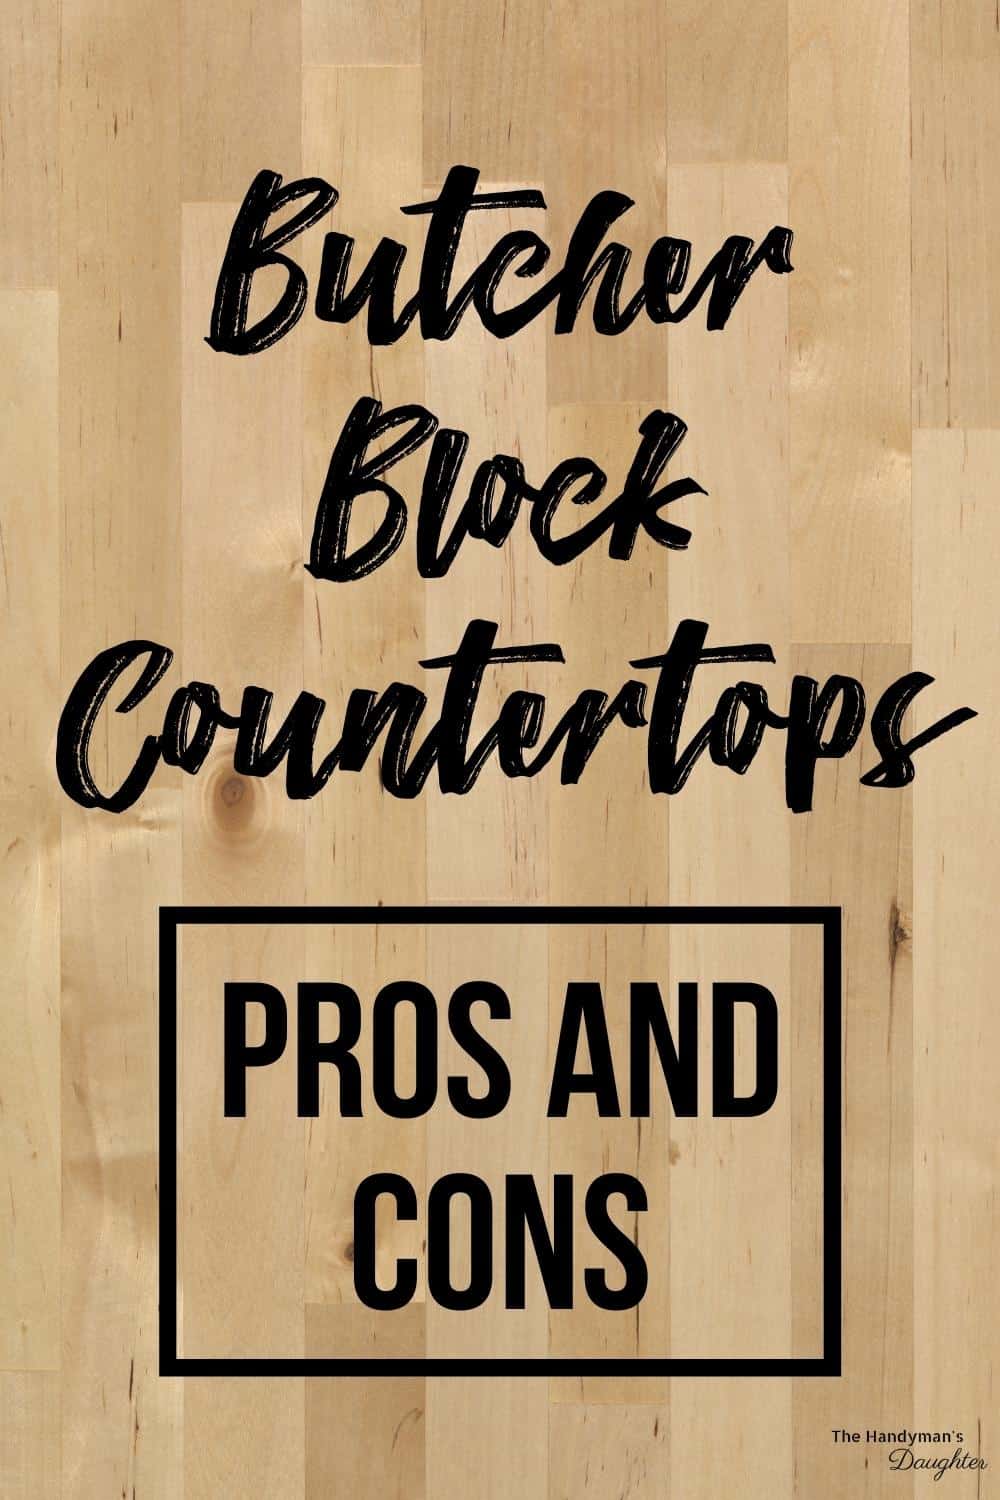 Pros and Cons of Butcher Block Countertops